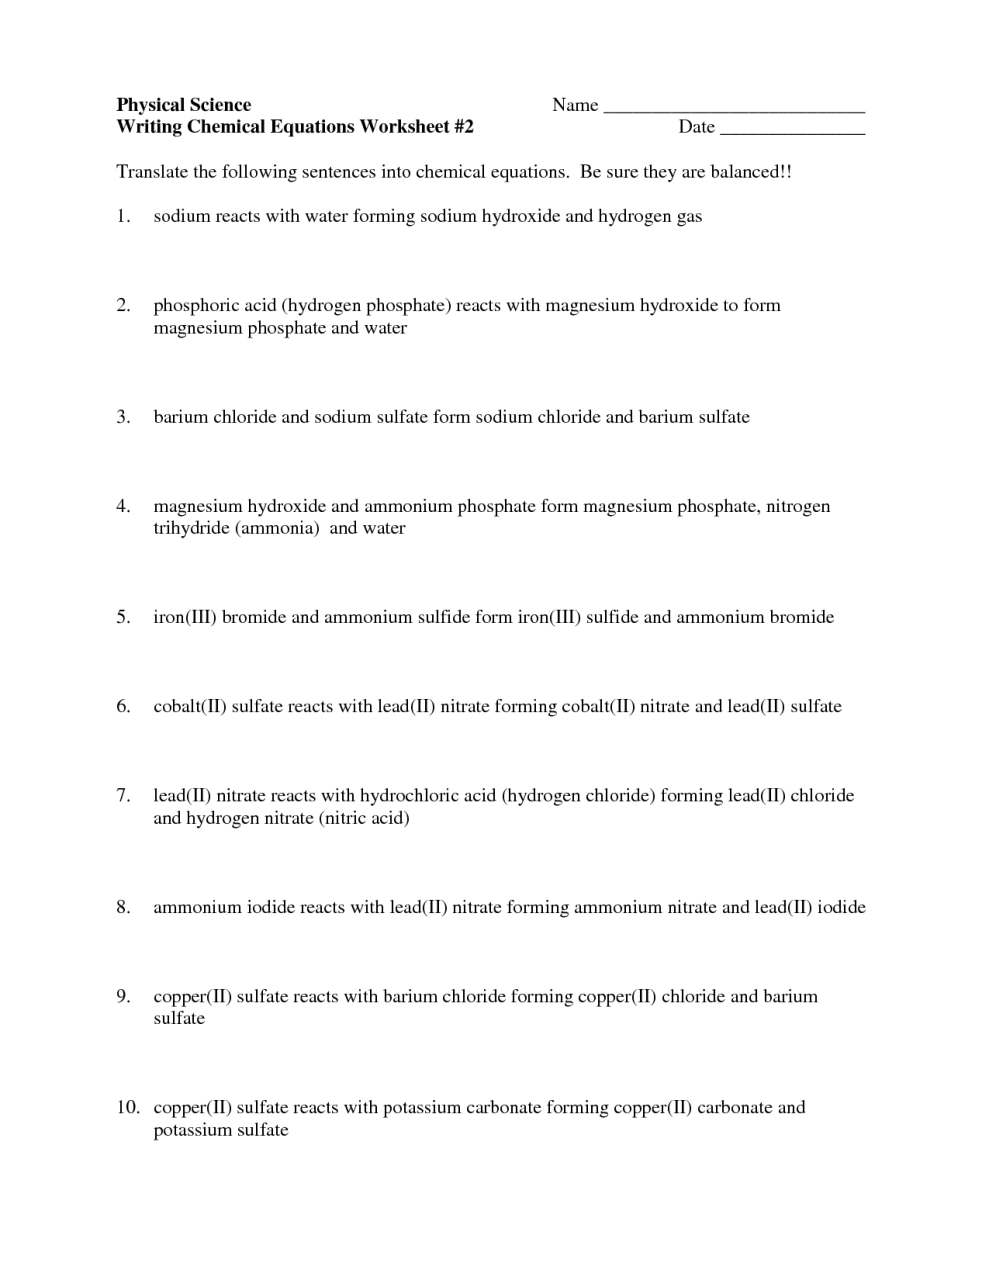 Balancing Equations Worksheet Pdf With Answers